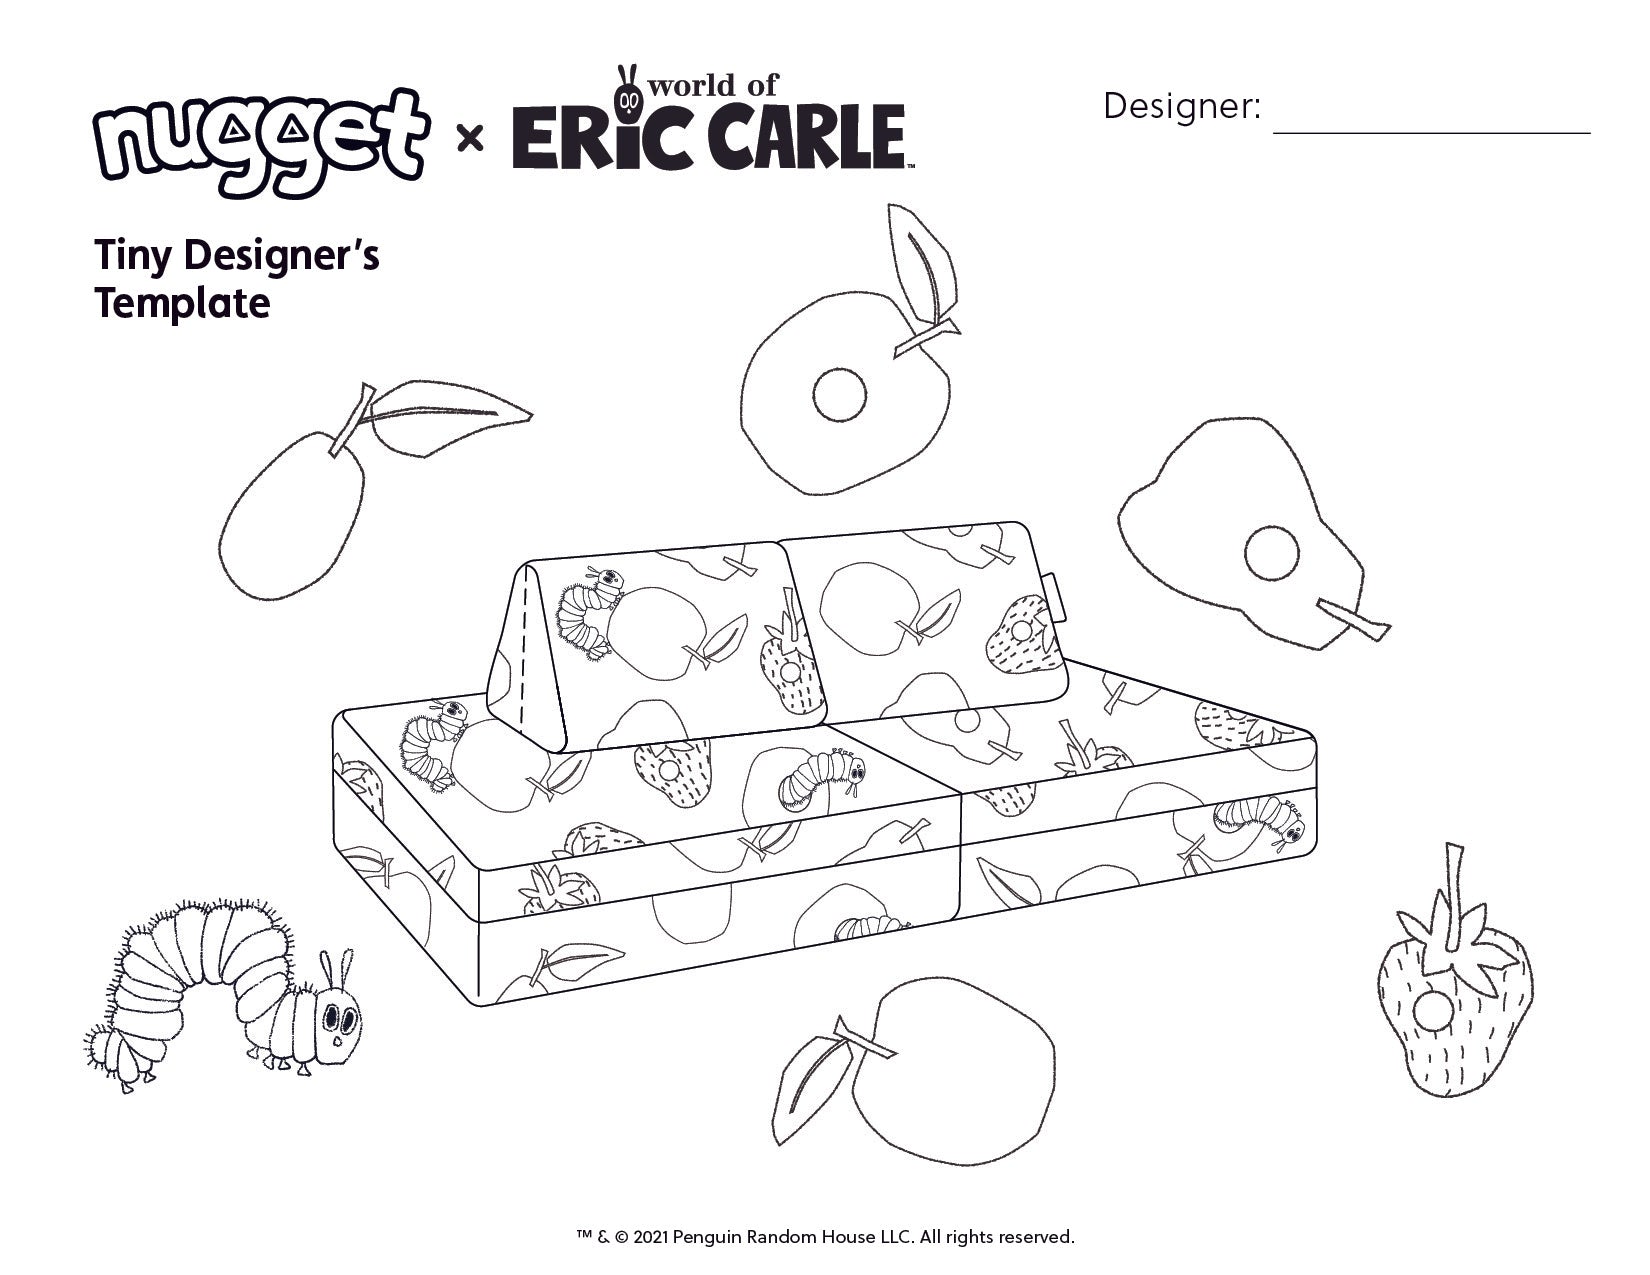 Nugget x The World of Eric Carle Coloring Sheet